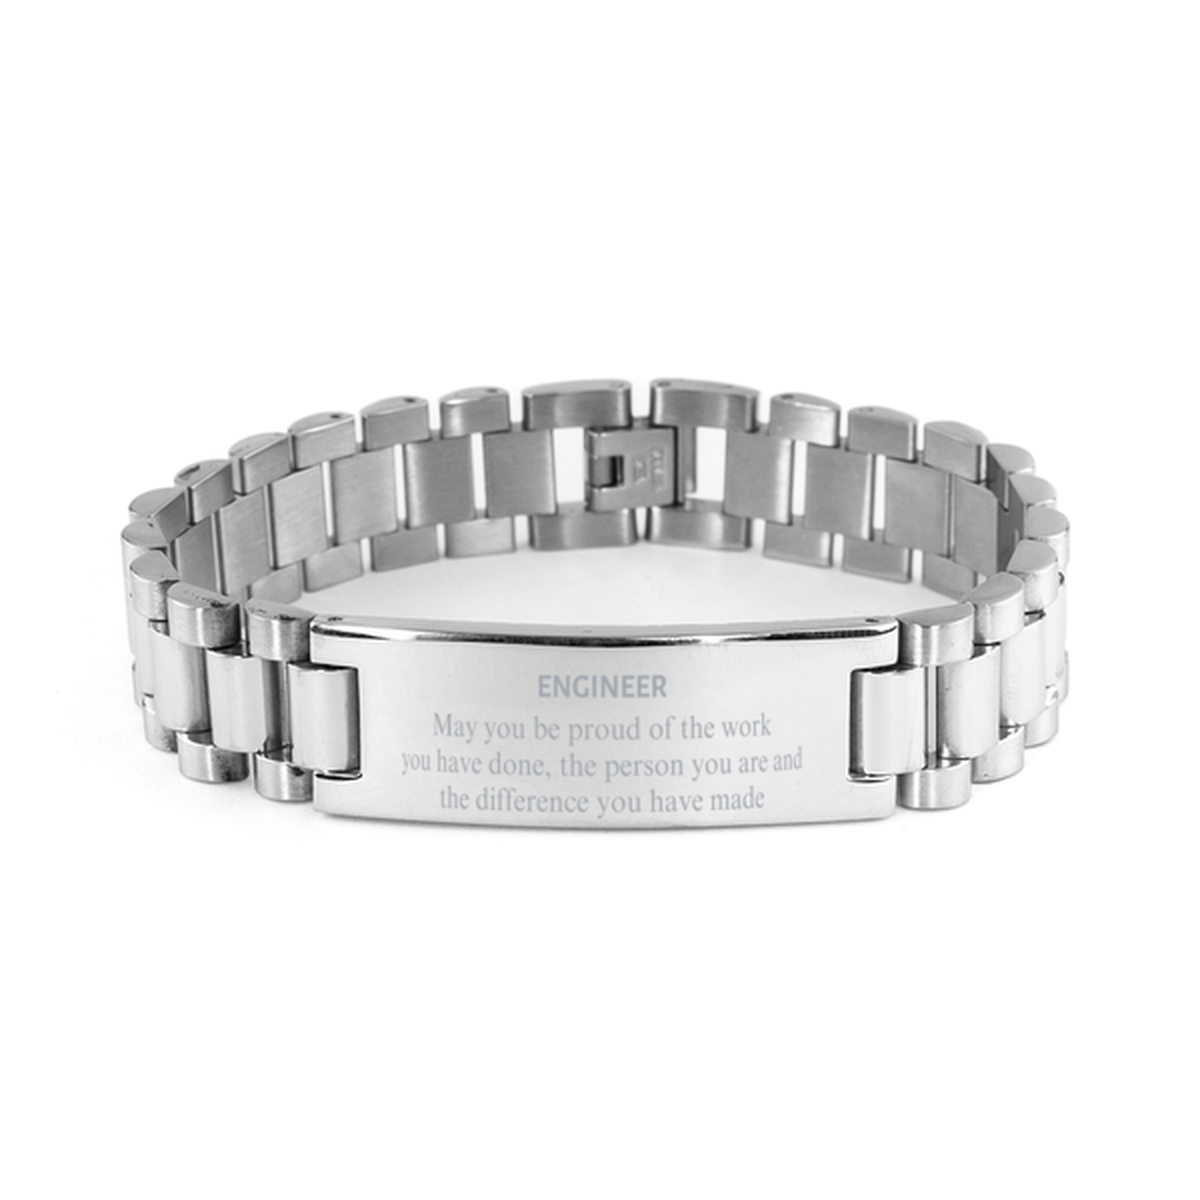 Engineer May you be proud of the work you have done, Retirement Engineer Ladder Stainless Steel Bracelet for Colleague Appreciation Gifts Amazing for Engineer